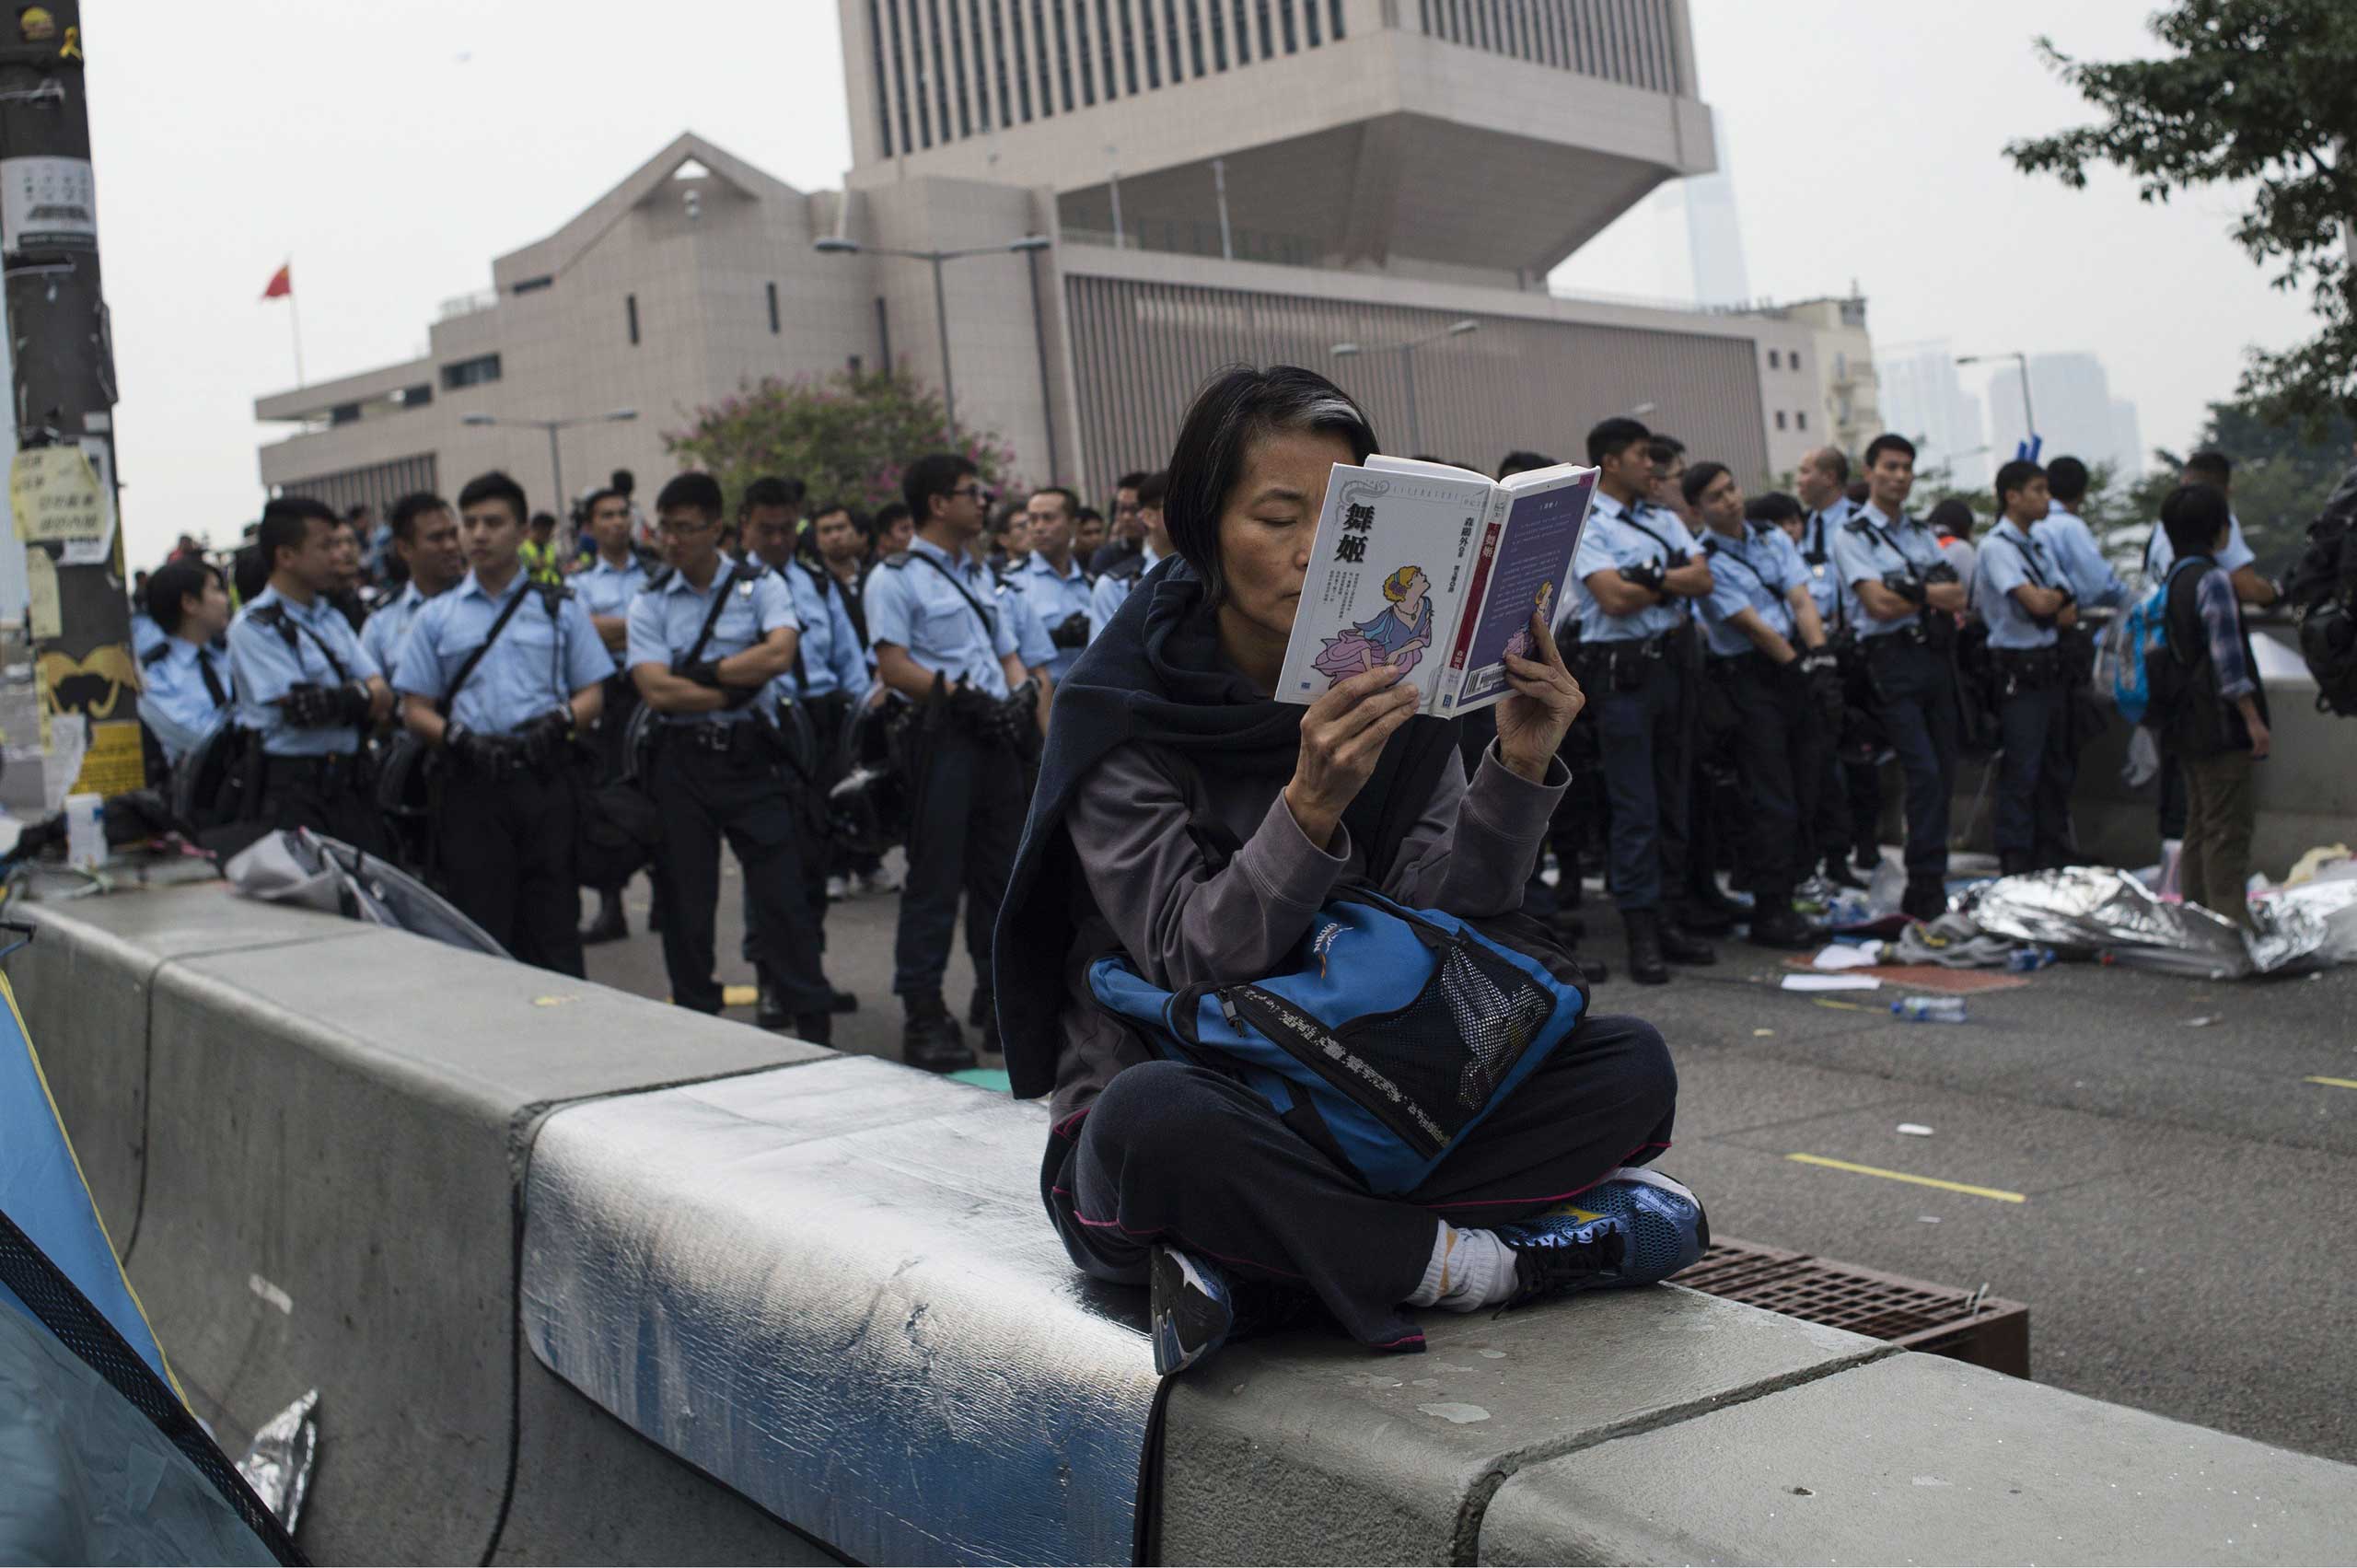 Dec. 11, 2014. A woman reads a book at the side of the road as Hong Kong police stand guard during the dismantling of the main pro-democracy protest camp in Hong Kong.